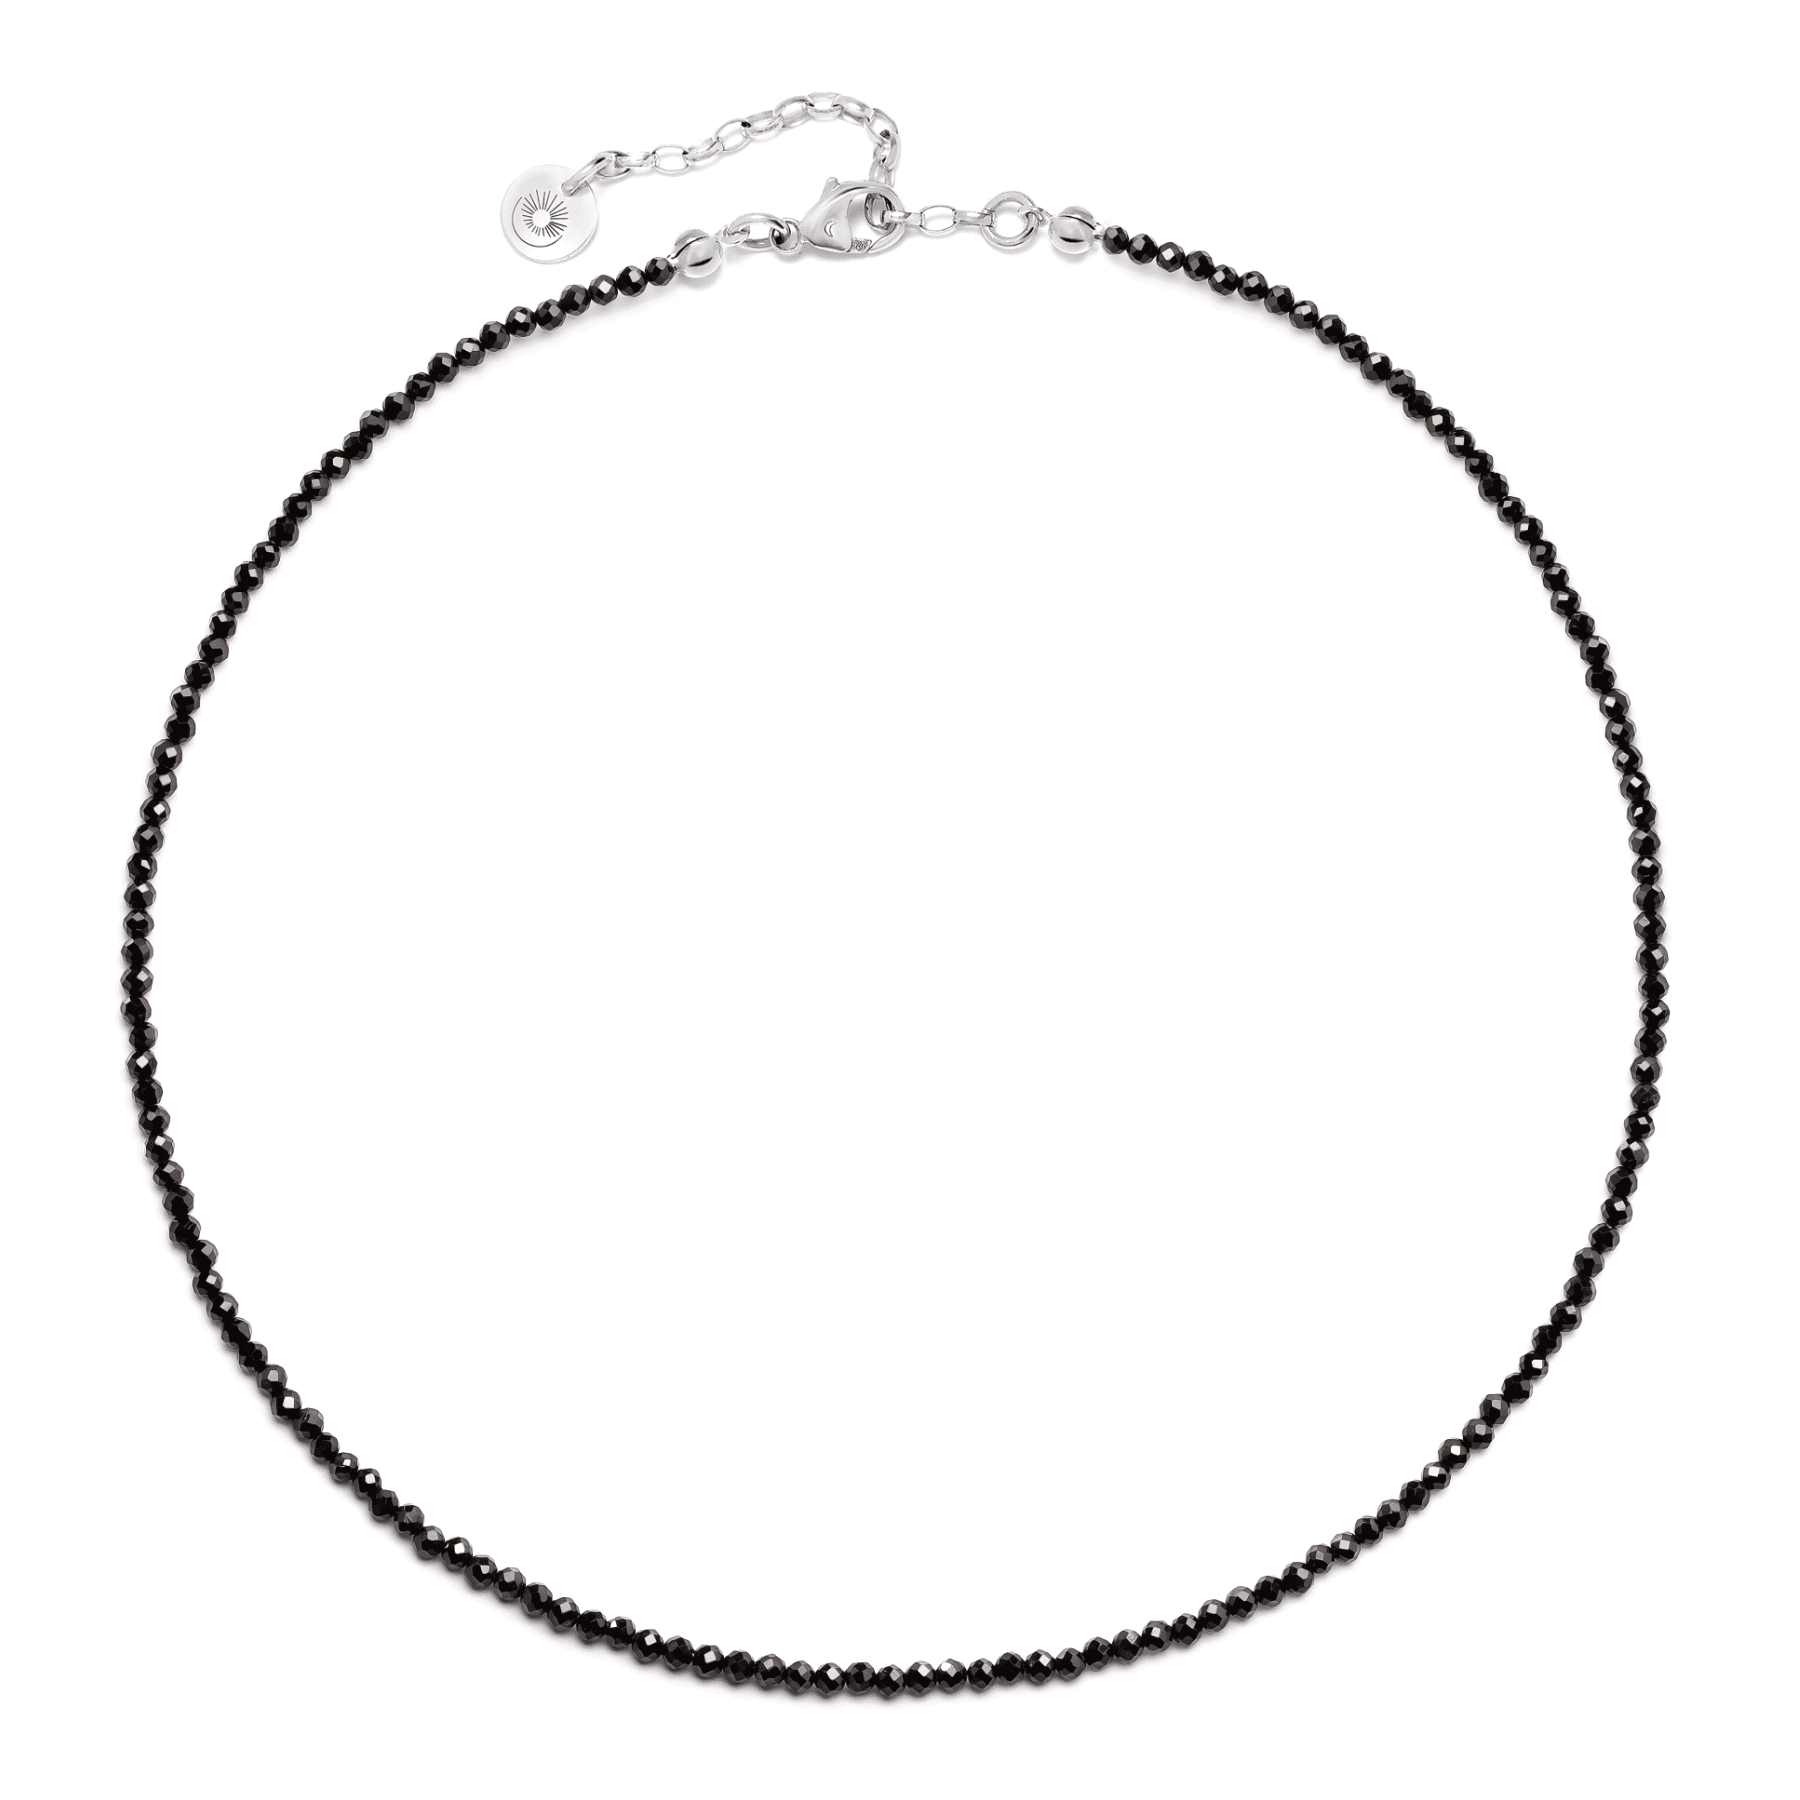 Black gemstones necklace from tourmaline with silver elementson white background